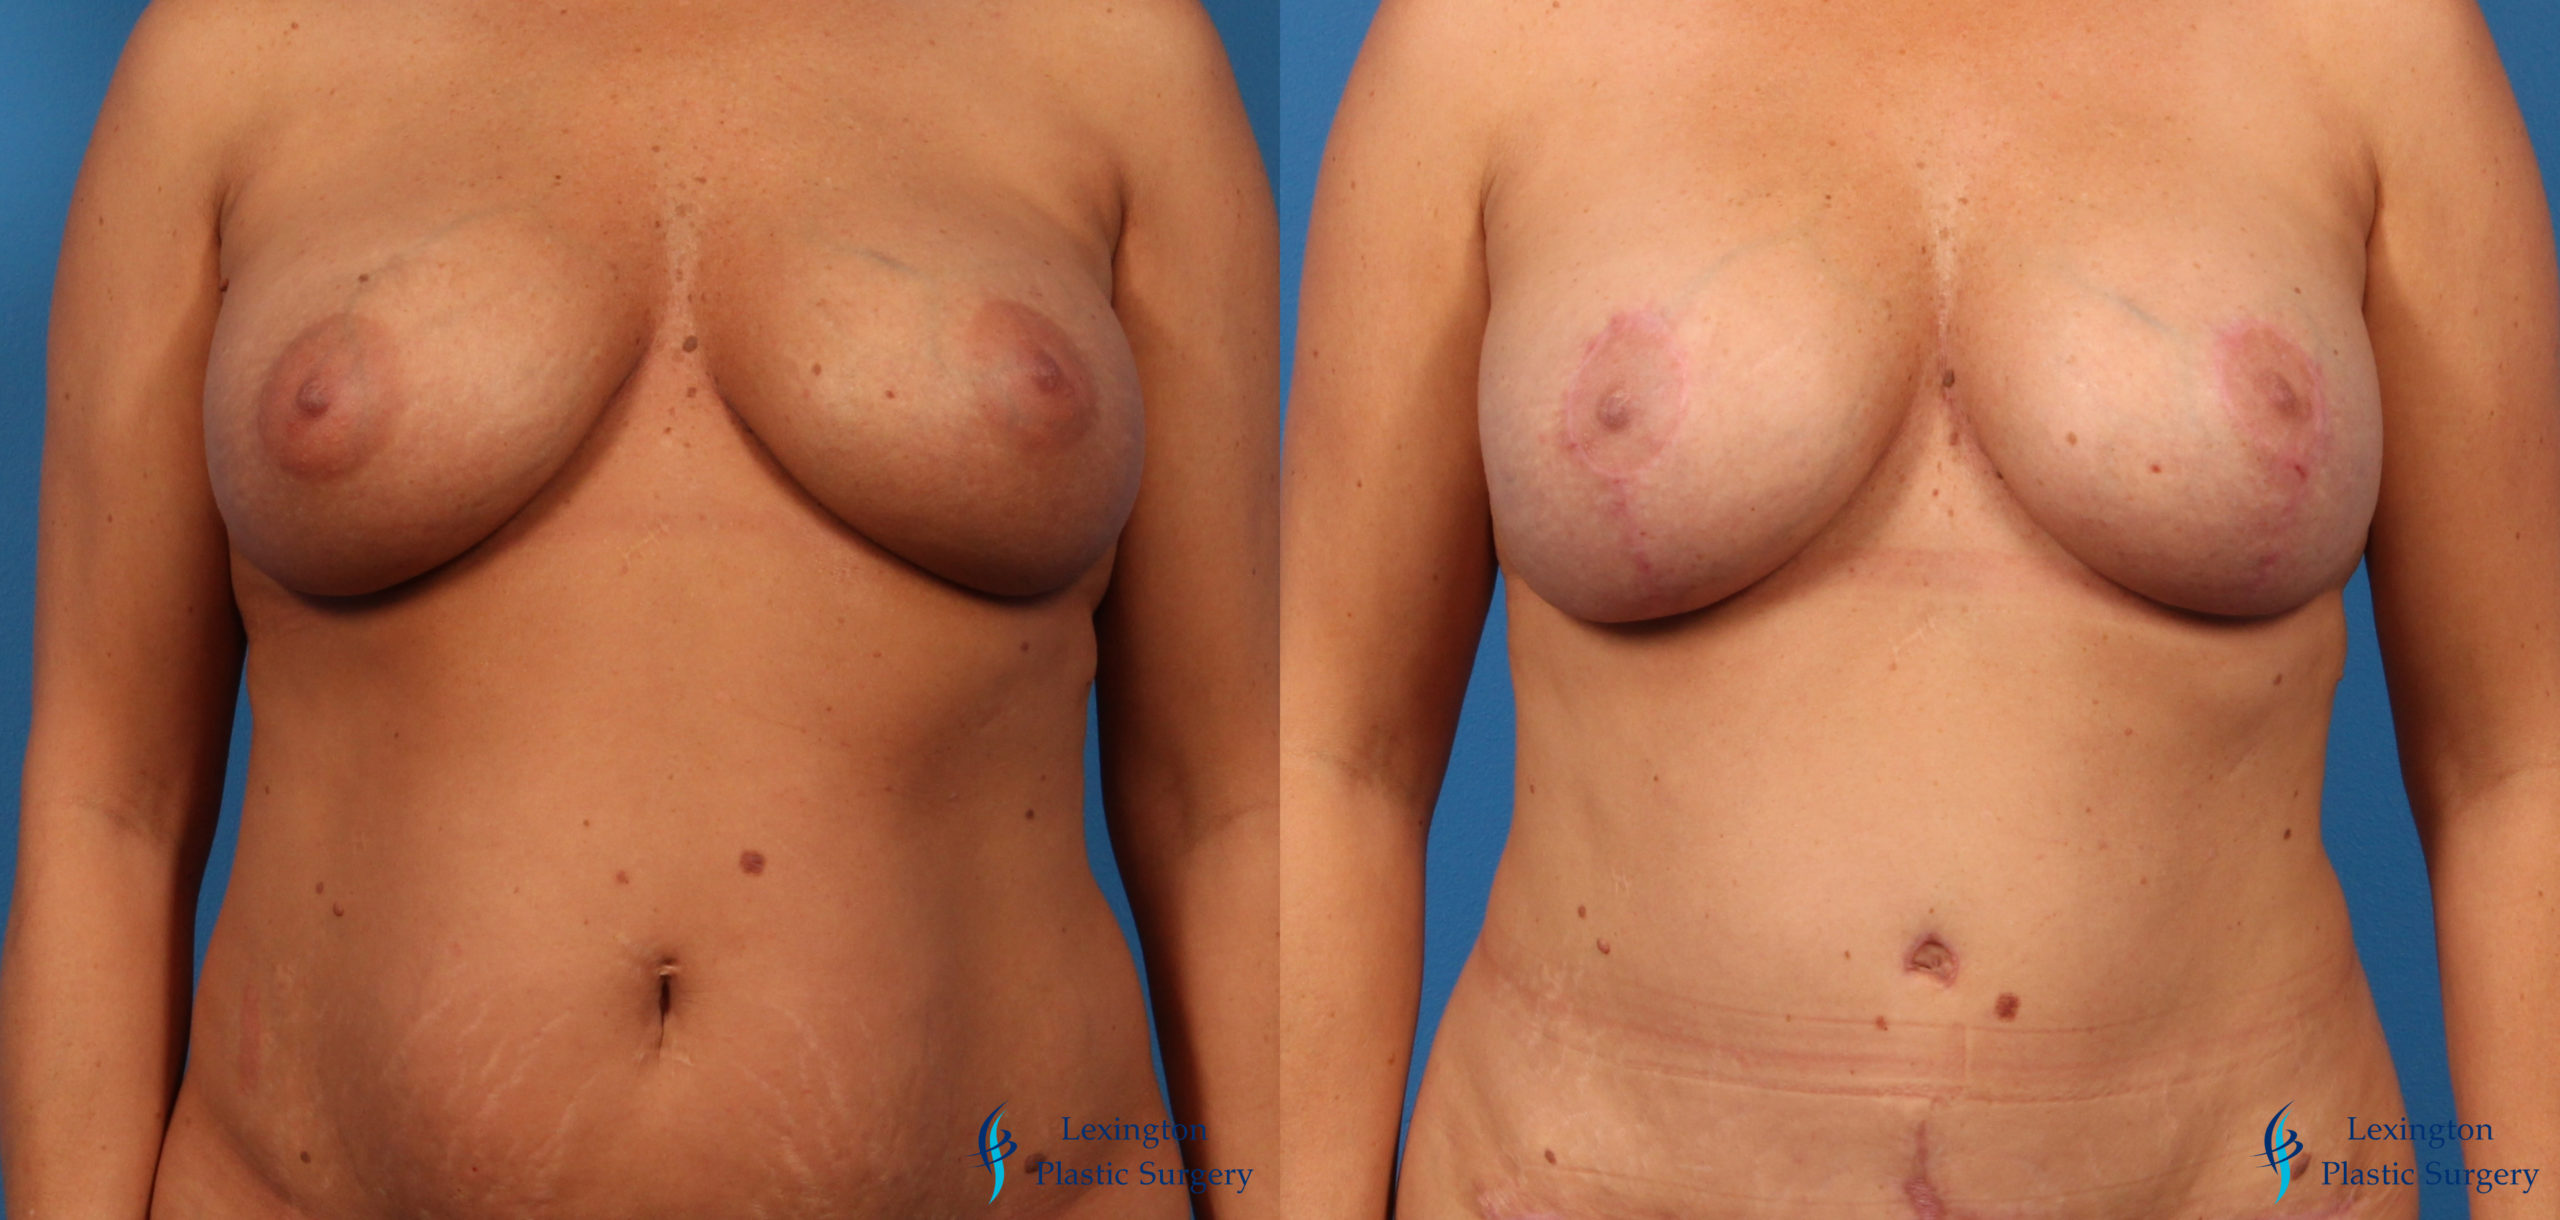 Breast Augmentation With Lift: Patient 4